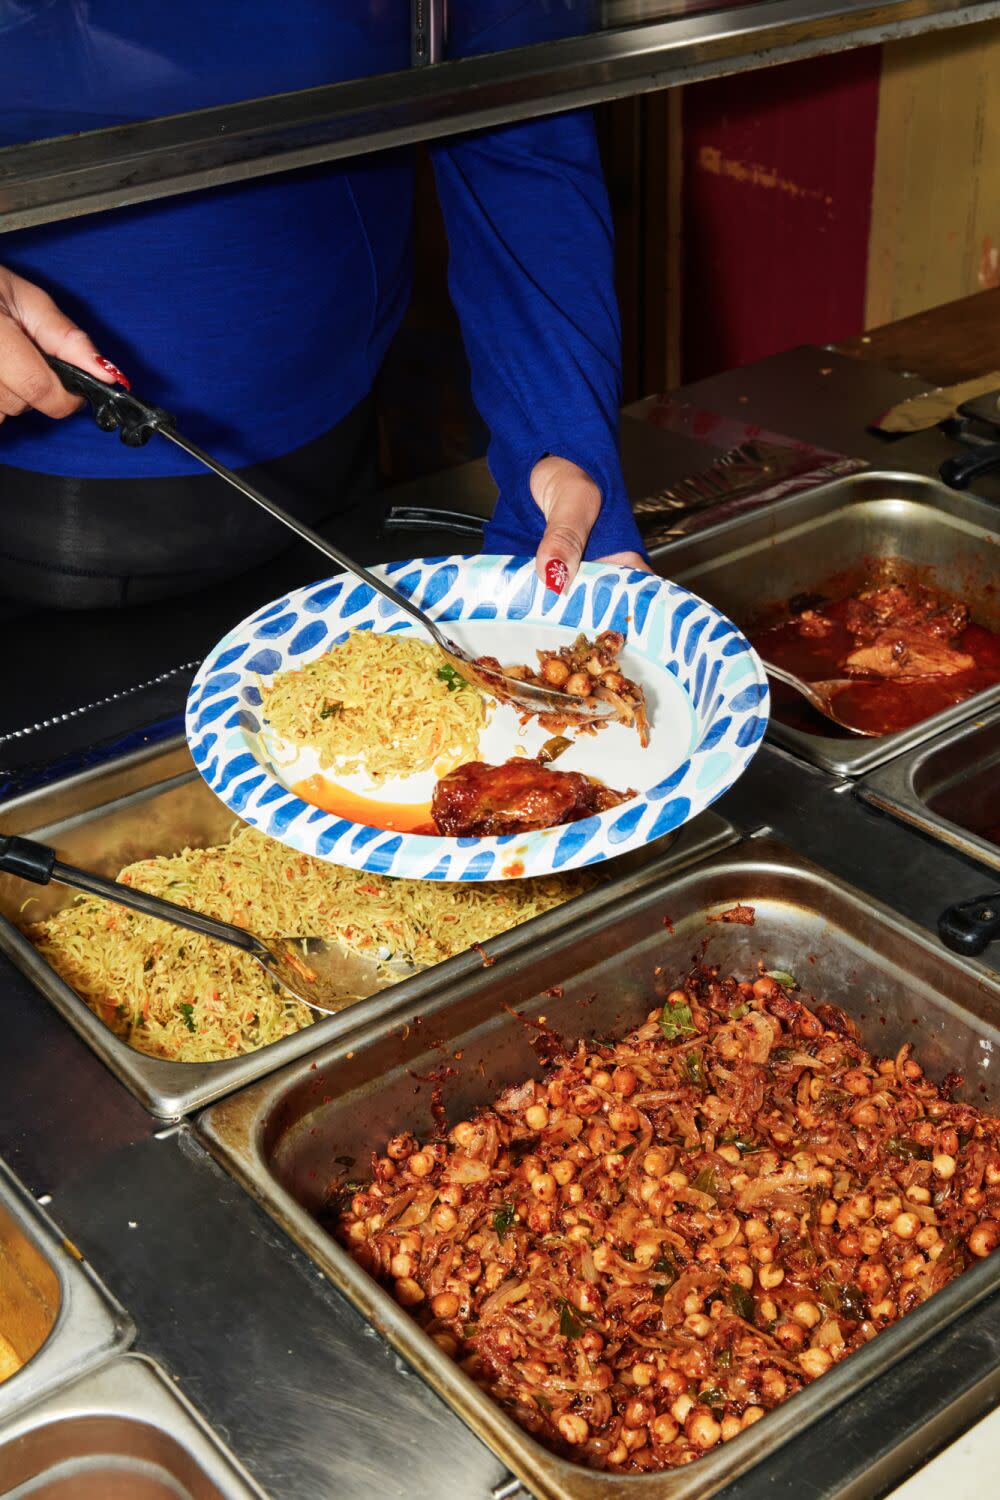 A diner loading up a plate with food from the buffet offerings